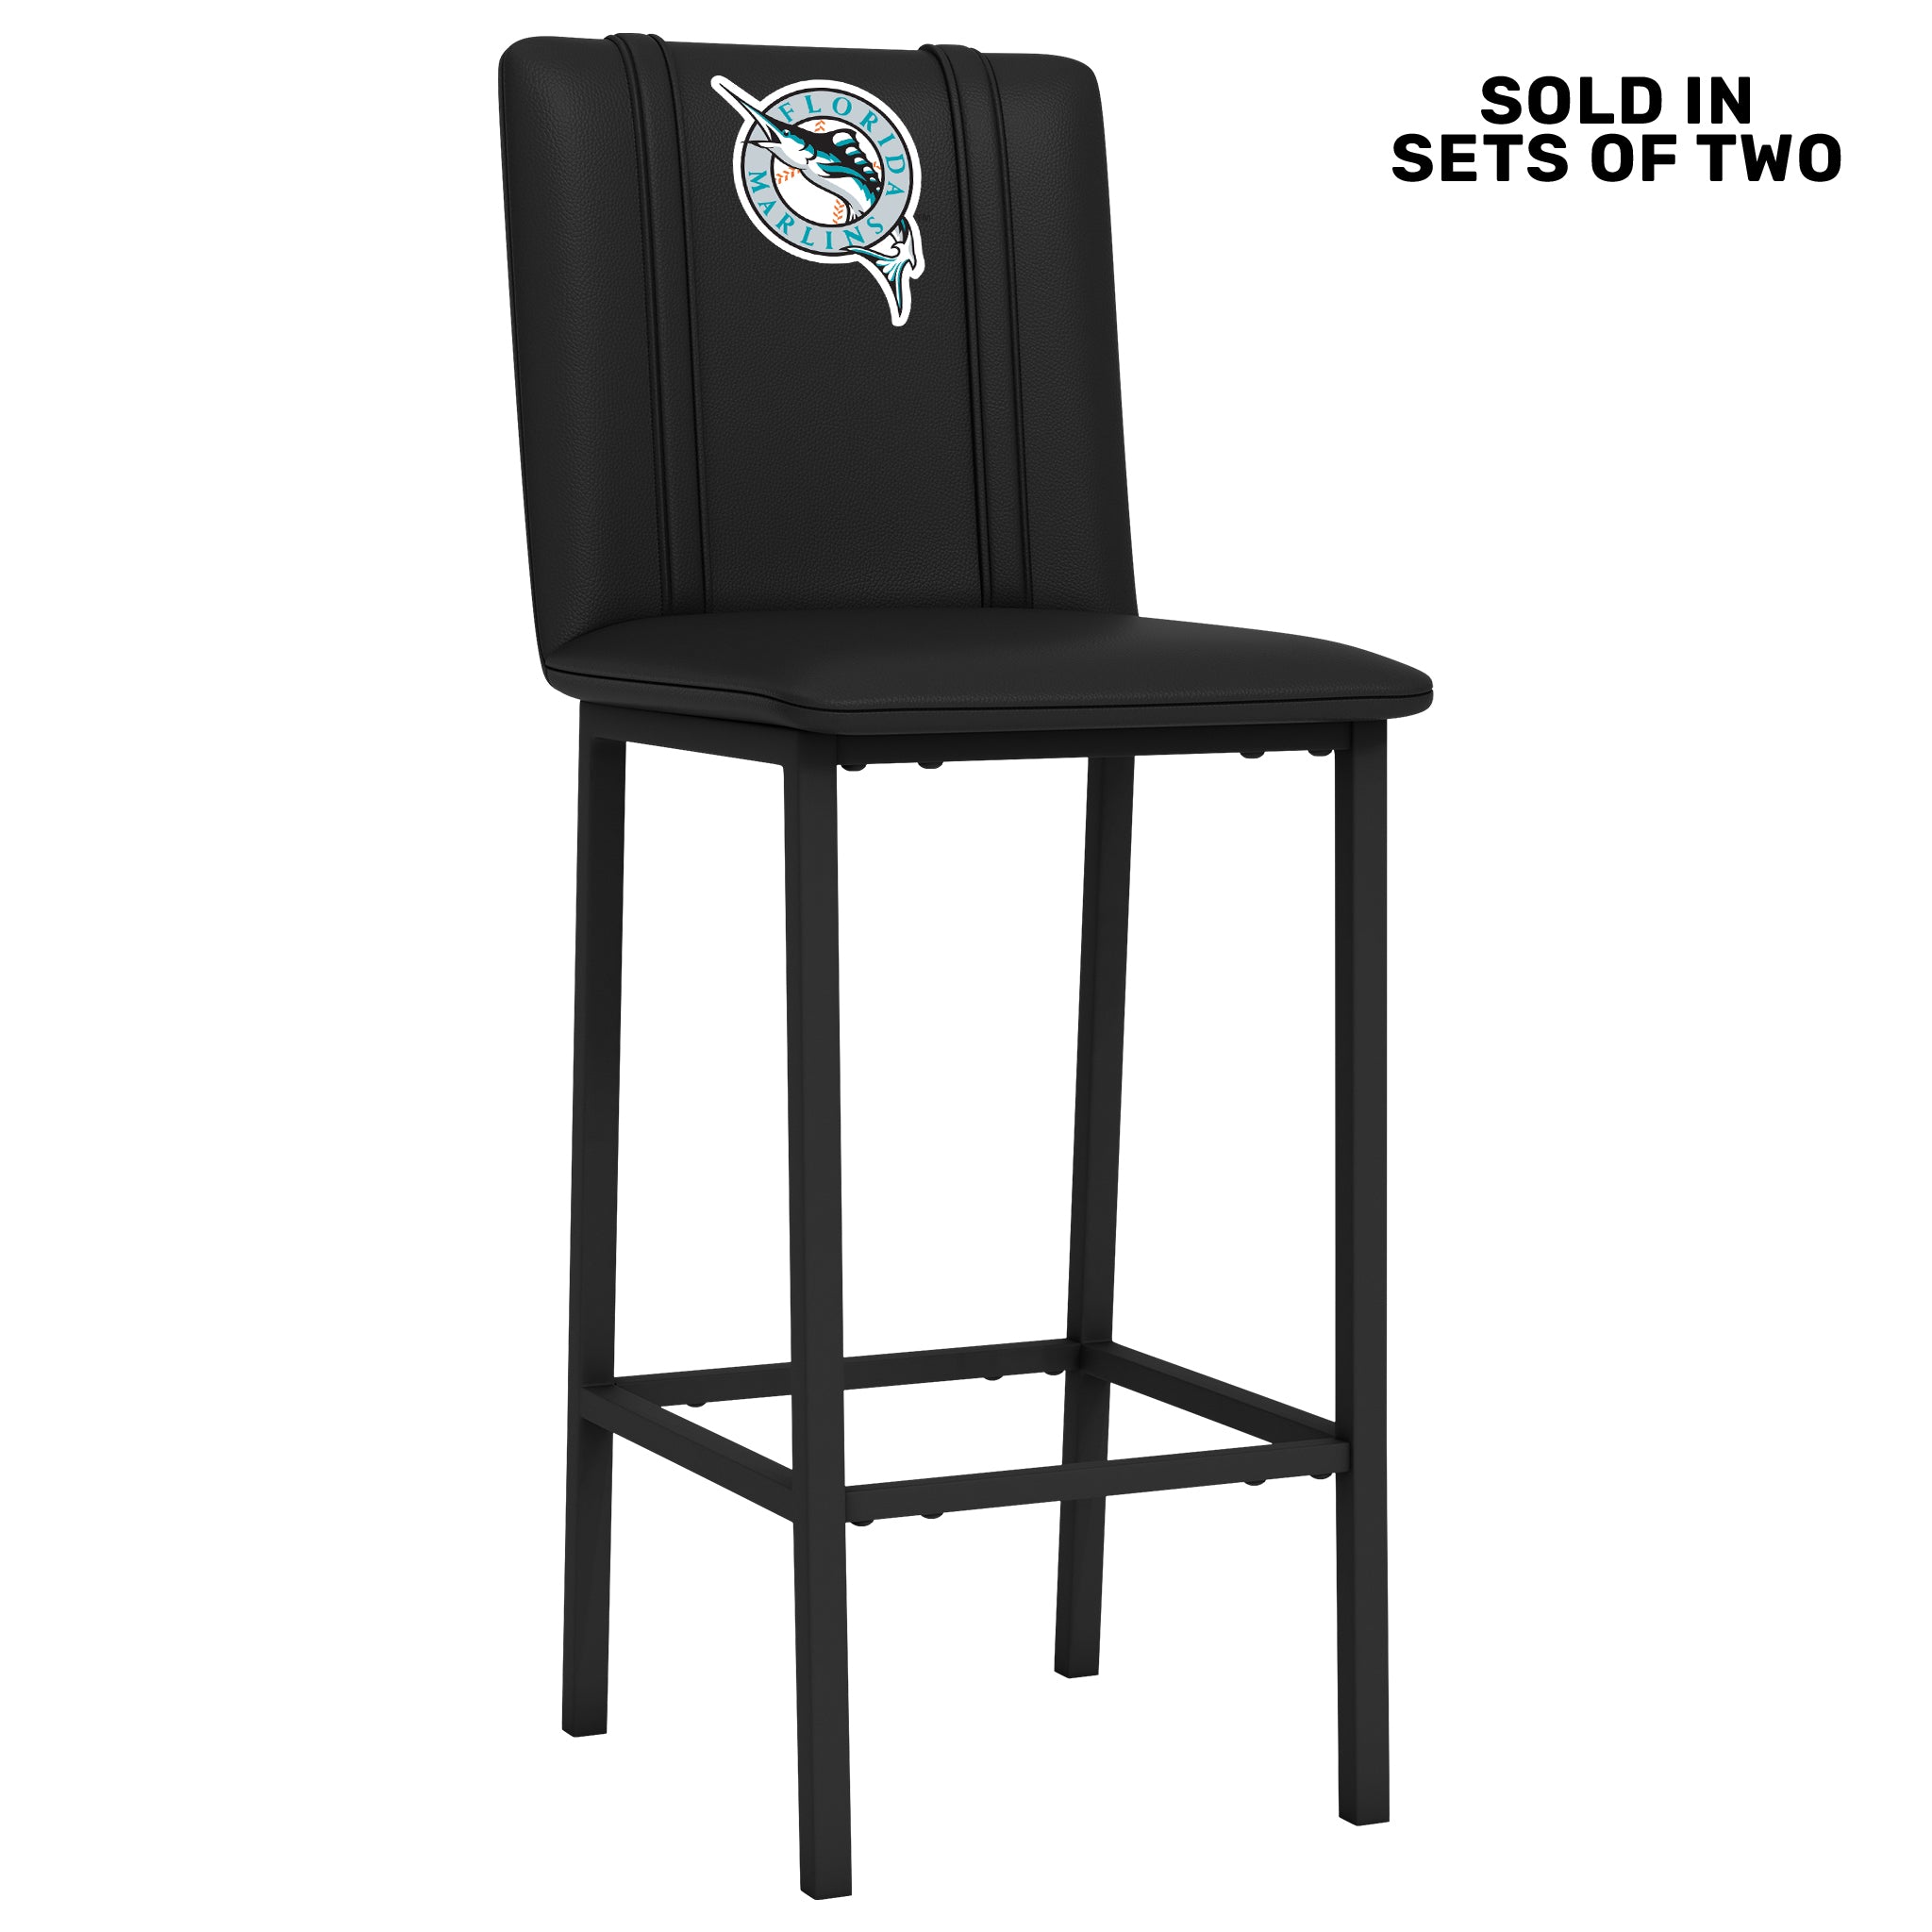 Bar Stool 500 with Florida Marlins Cooperstown Primary Set of 2